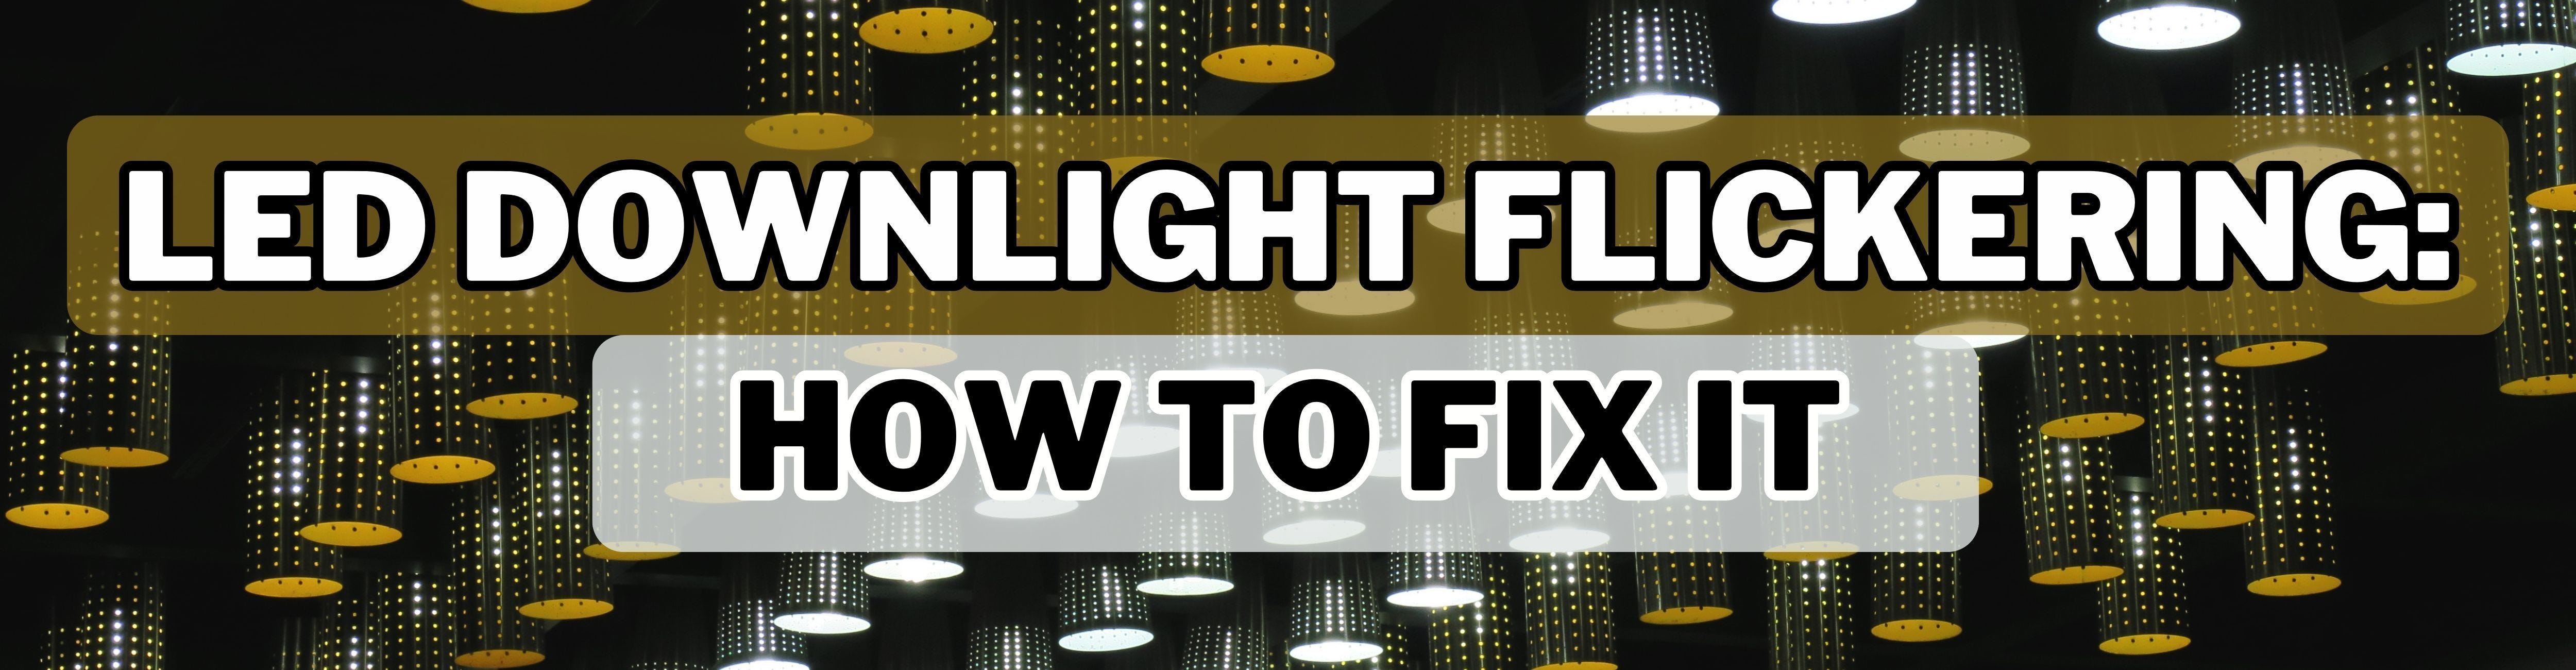 LED Downlight Flickering: How To Fix It